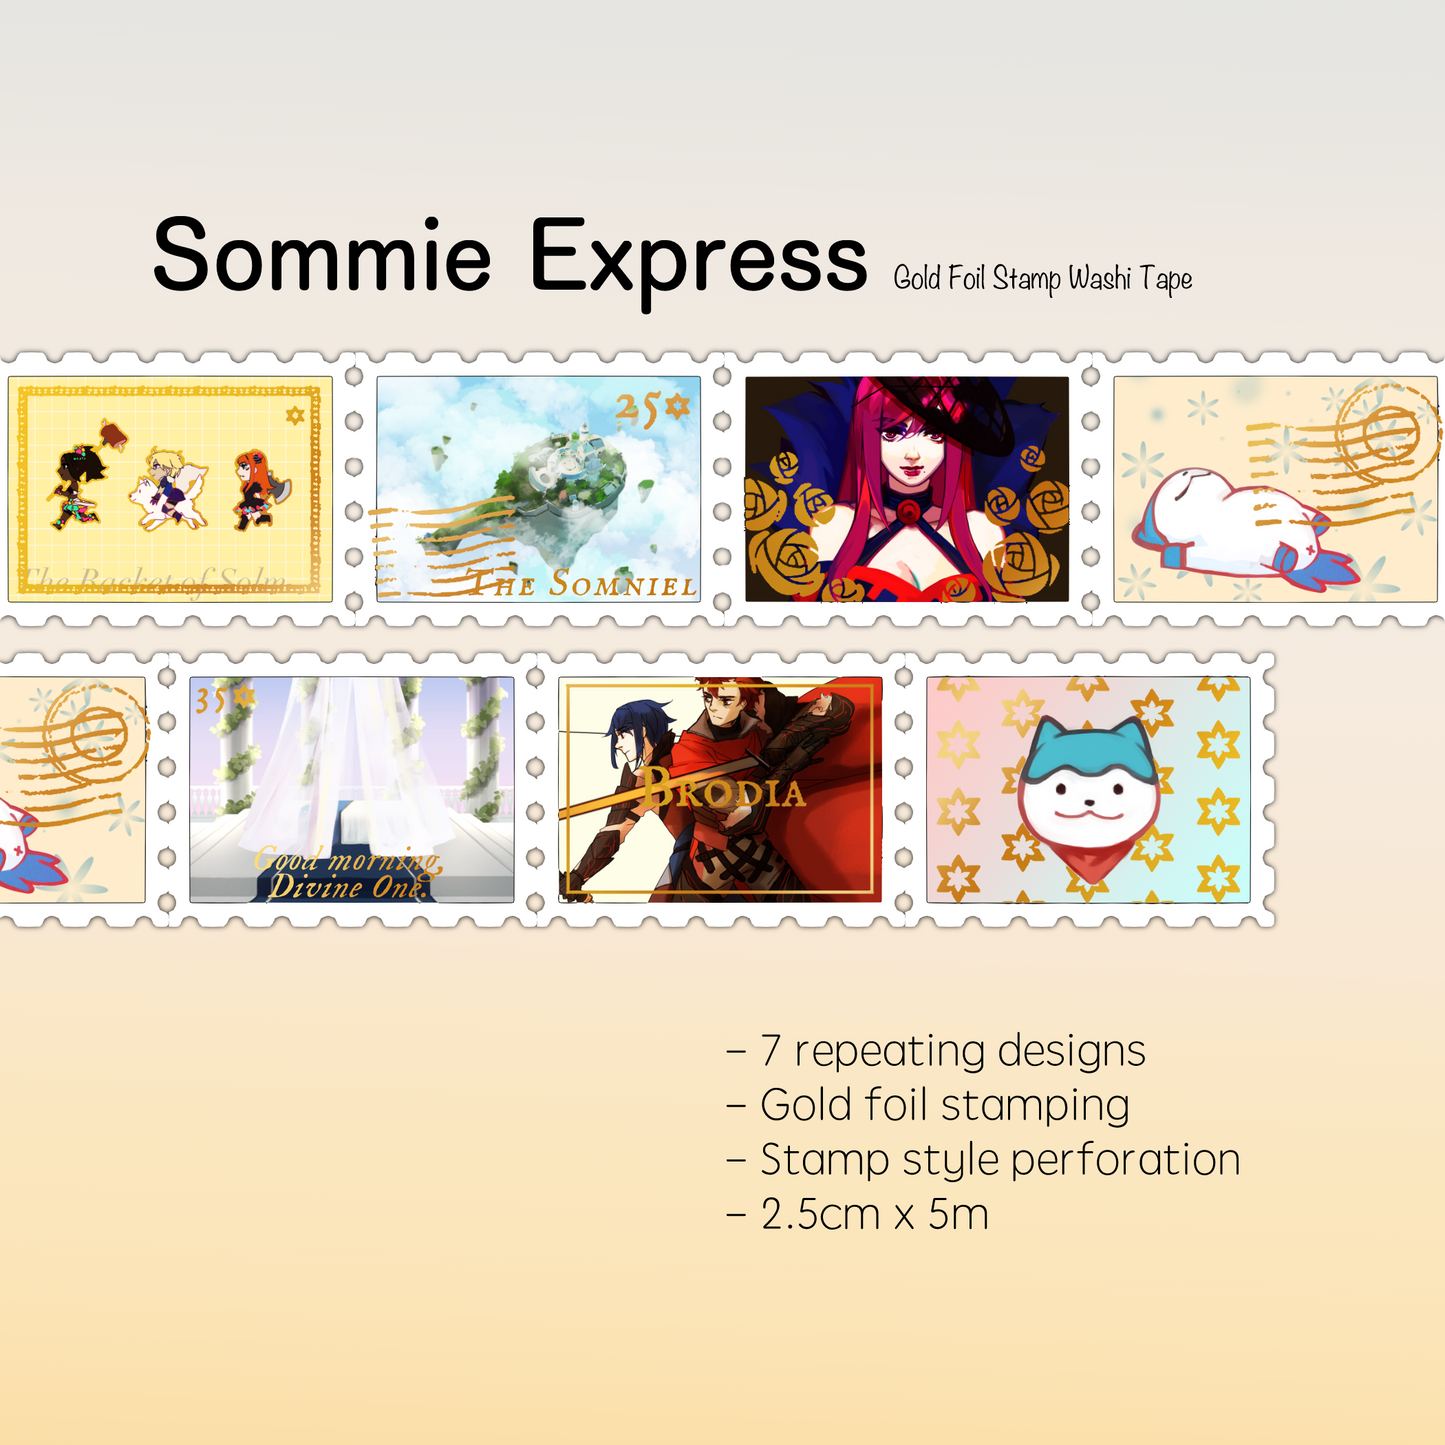 Sommie Express